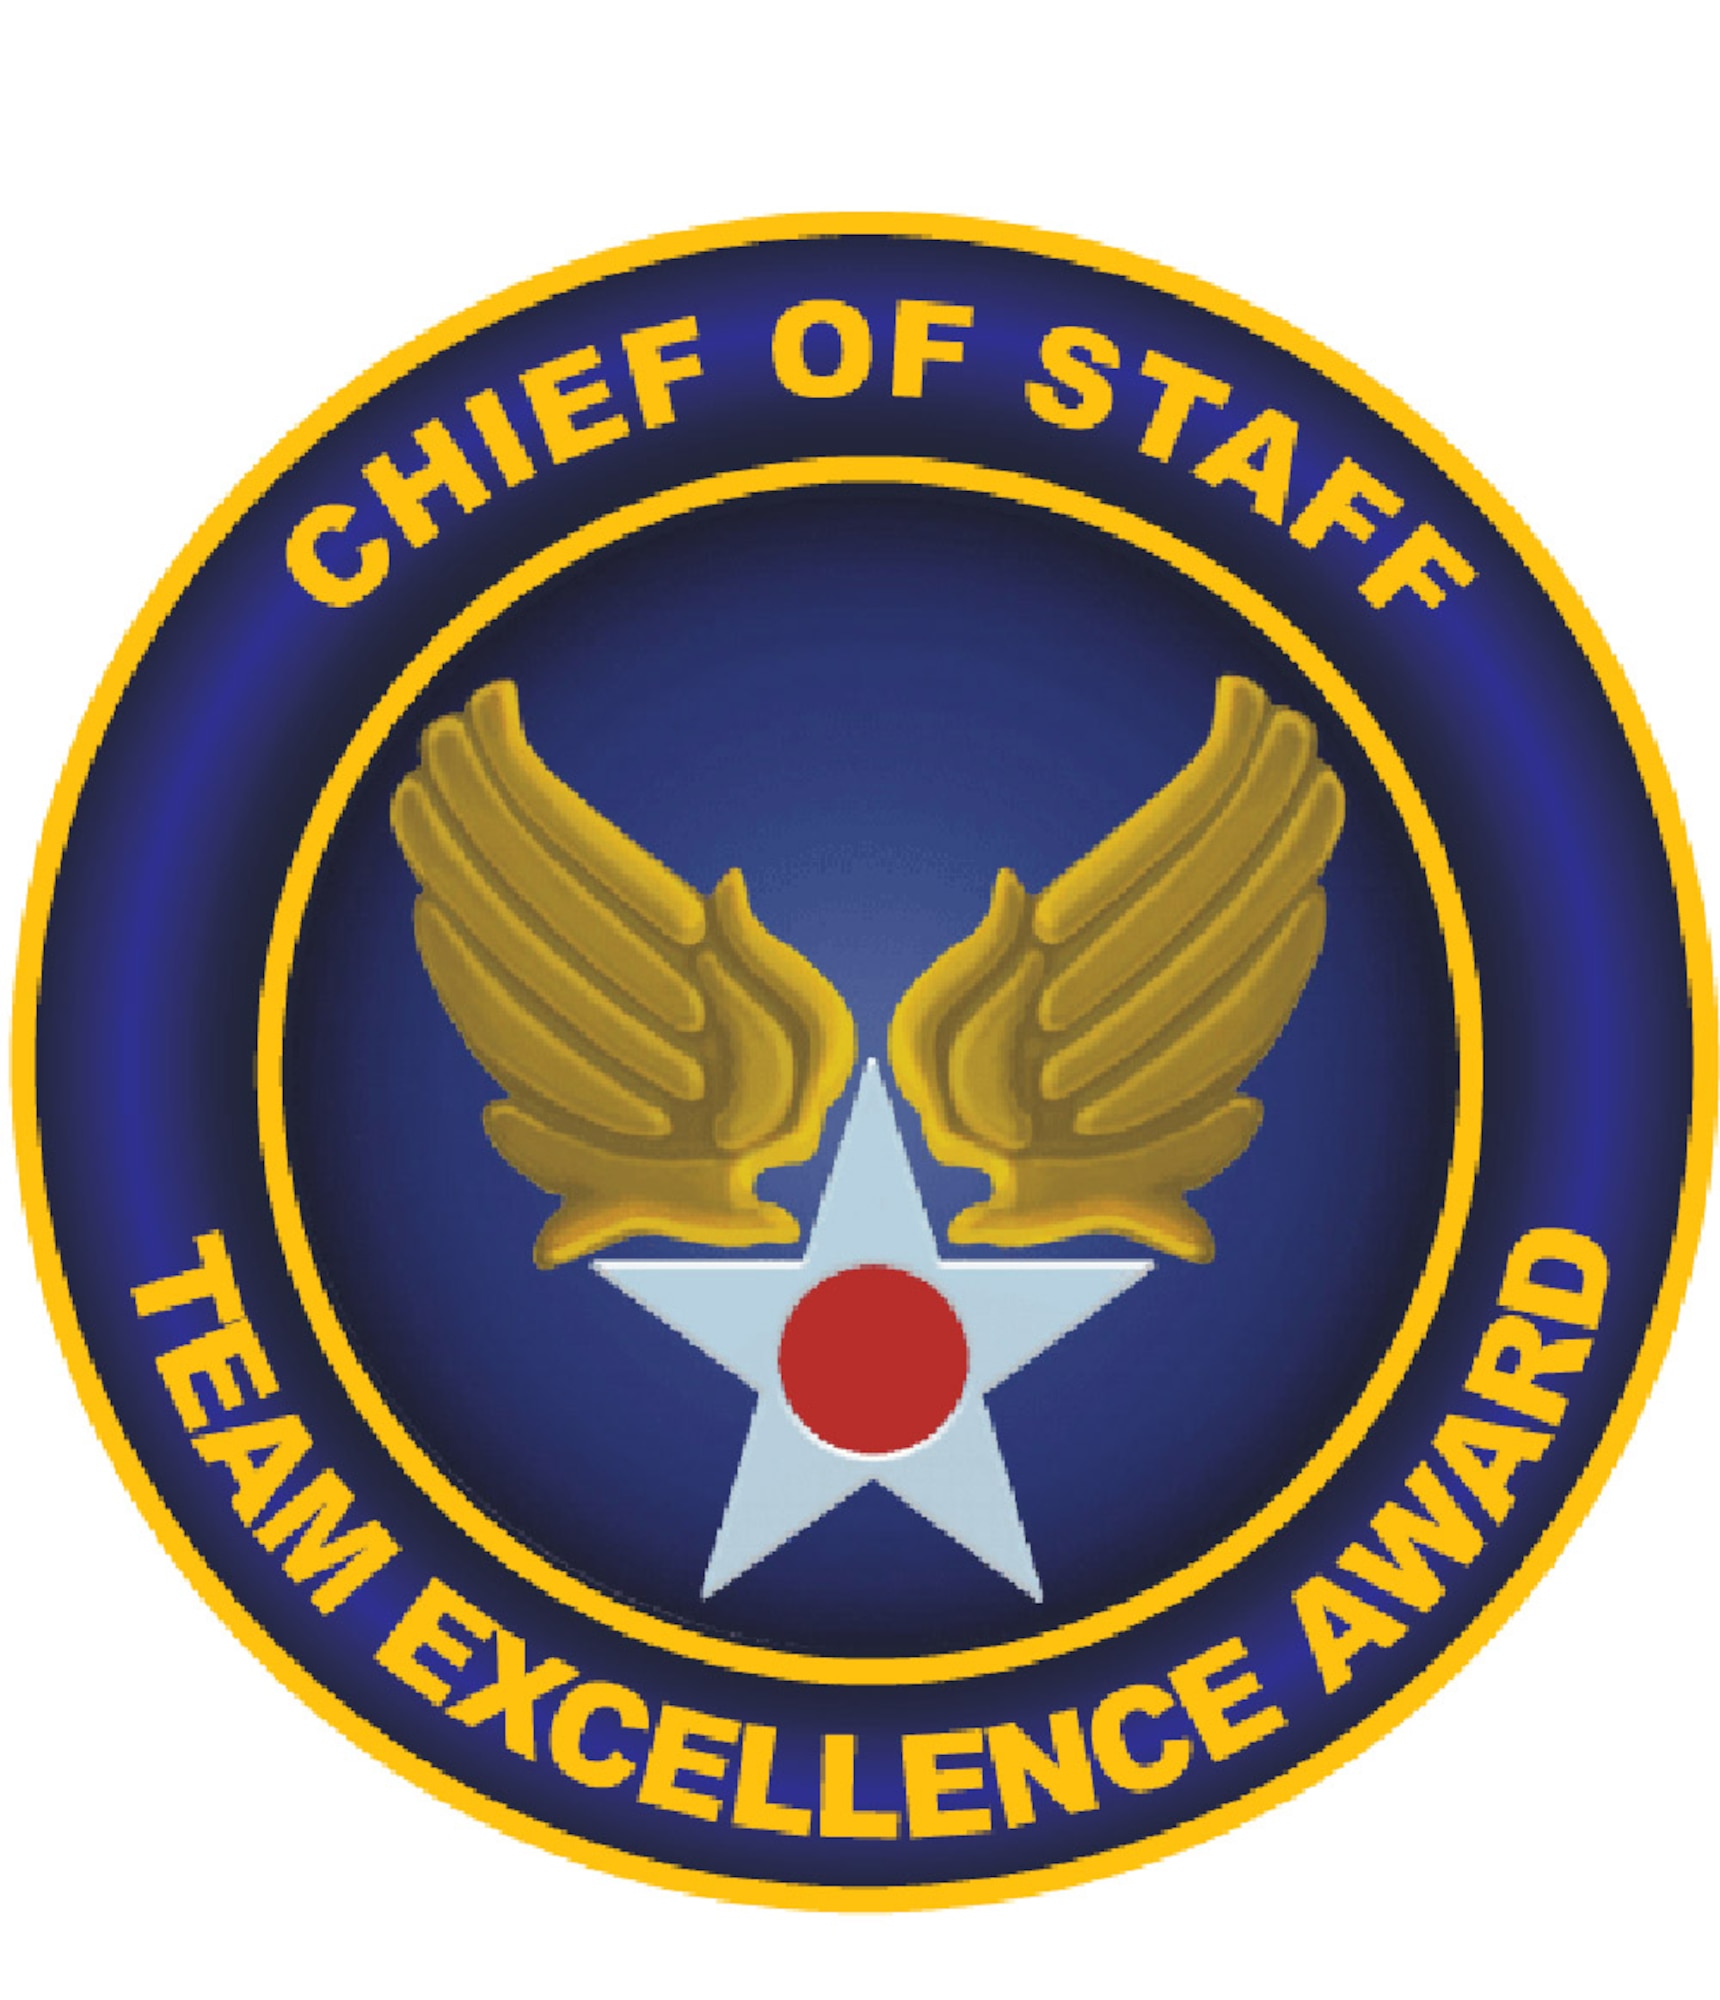 Air Force teams can compete for the 2007 Chief of Staff Team Excellence Award.  To compete, teams must have completed a performance improvement process two years prior to Sept. 1.   All Air Force members -- military, civilians and contractors -- are eligible to participate. (U.S. Air Force Illustration)